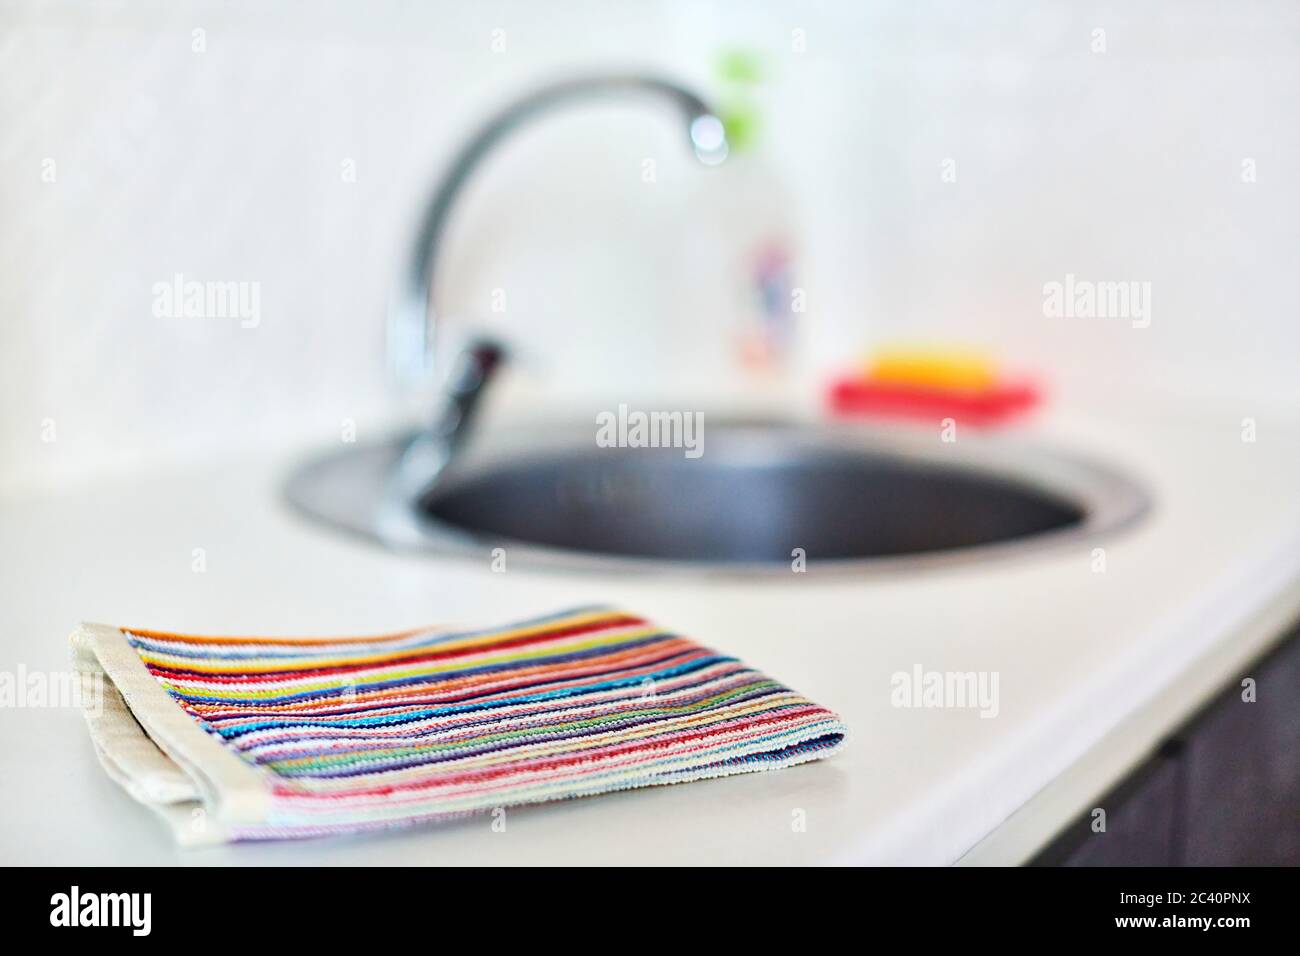 Kitchen towel and sink without dirty dishes background. Dishcloth on kitchen countertop. Cleaning and dish washing concept. Stock Photo